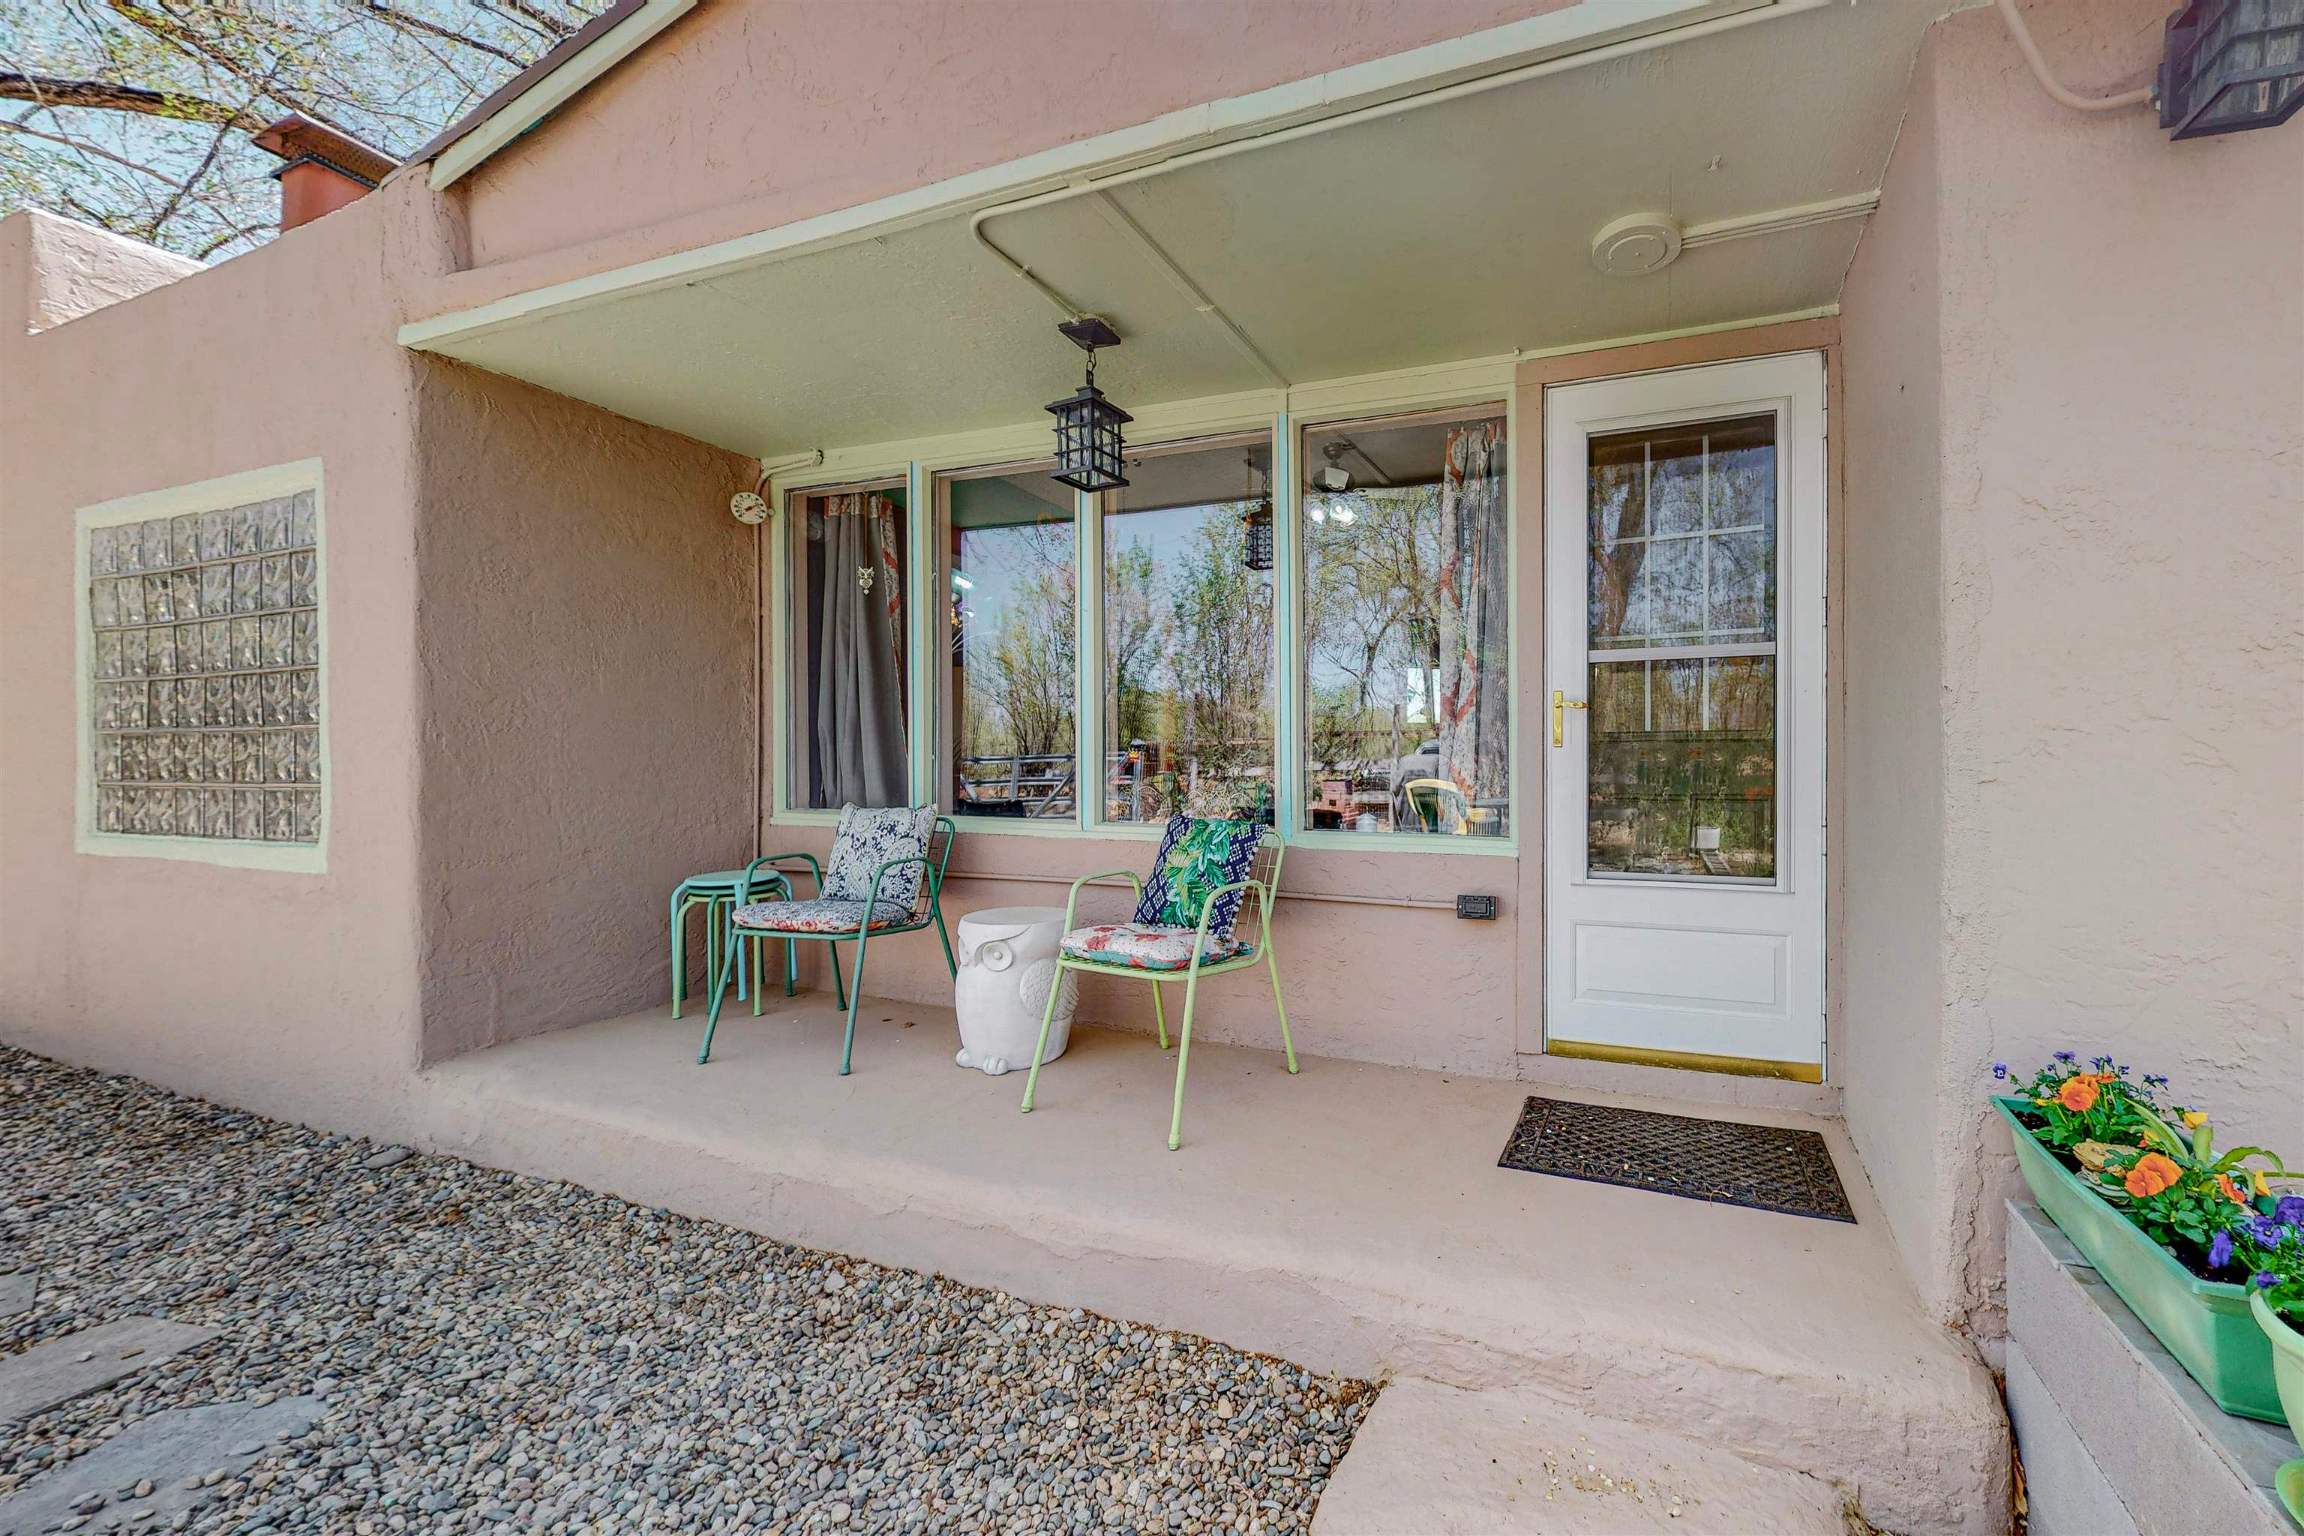 70 COUNTY RD 84B, Santa Fe, New Mexico 87506, 2 Bedrooms Bedrooms, ,2 BathroomsBathrooms,Residential,For Sale,70 COUNTY RD 84B,202201500